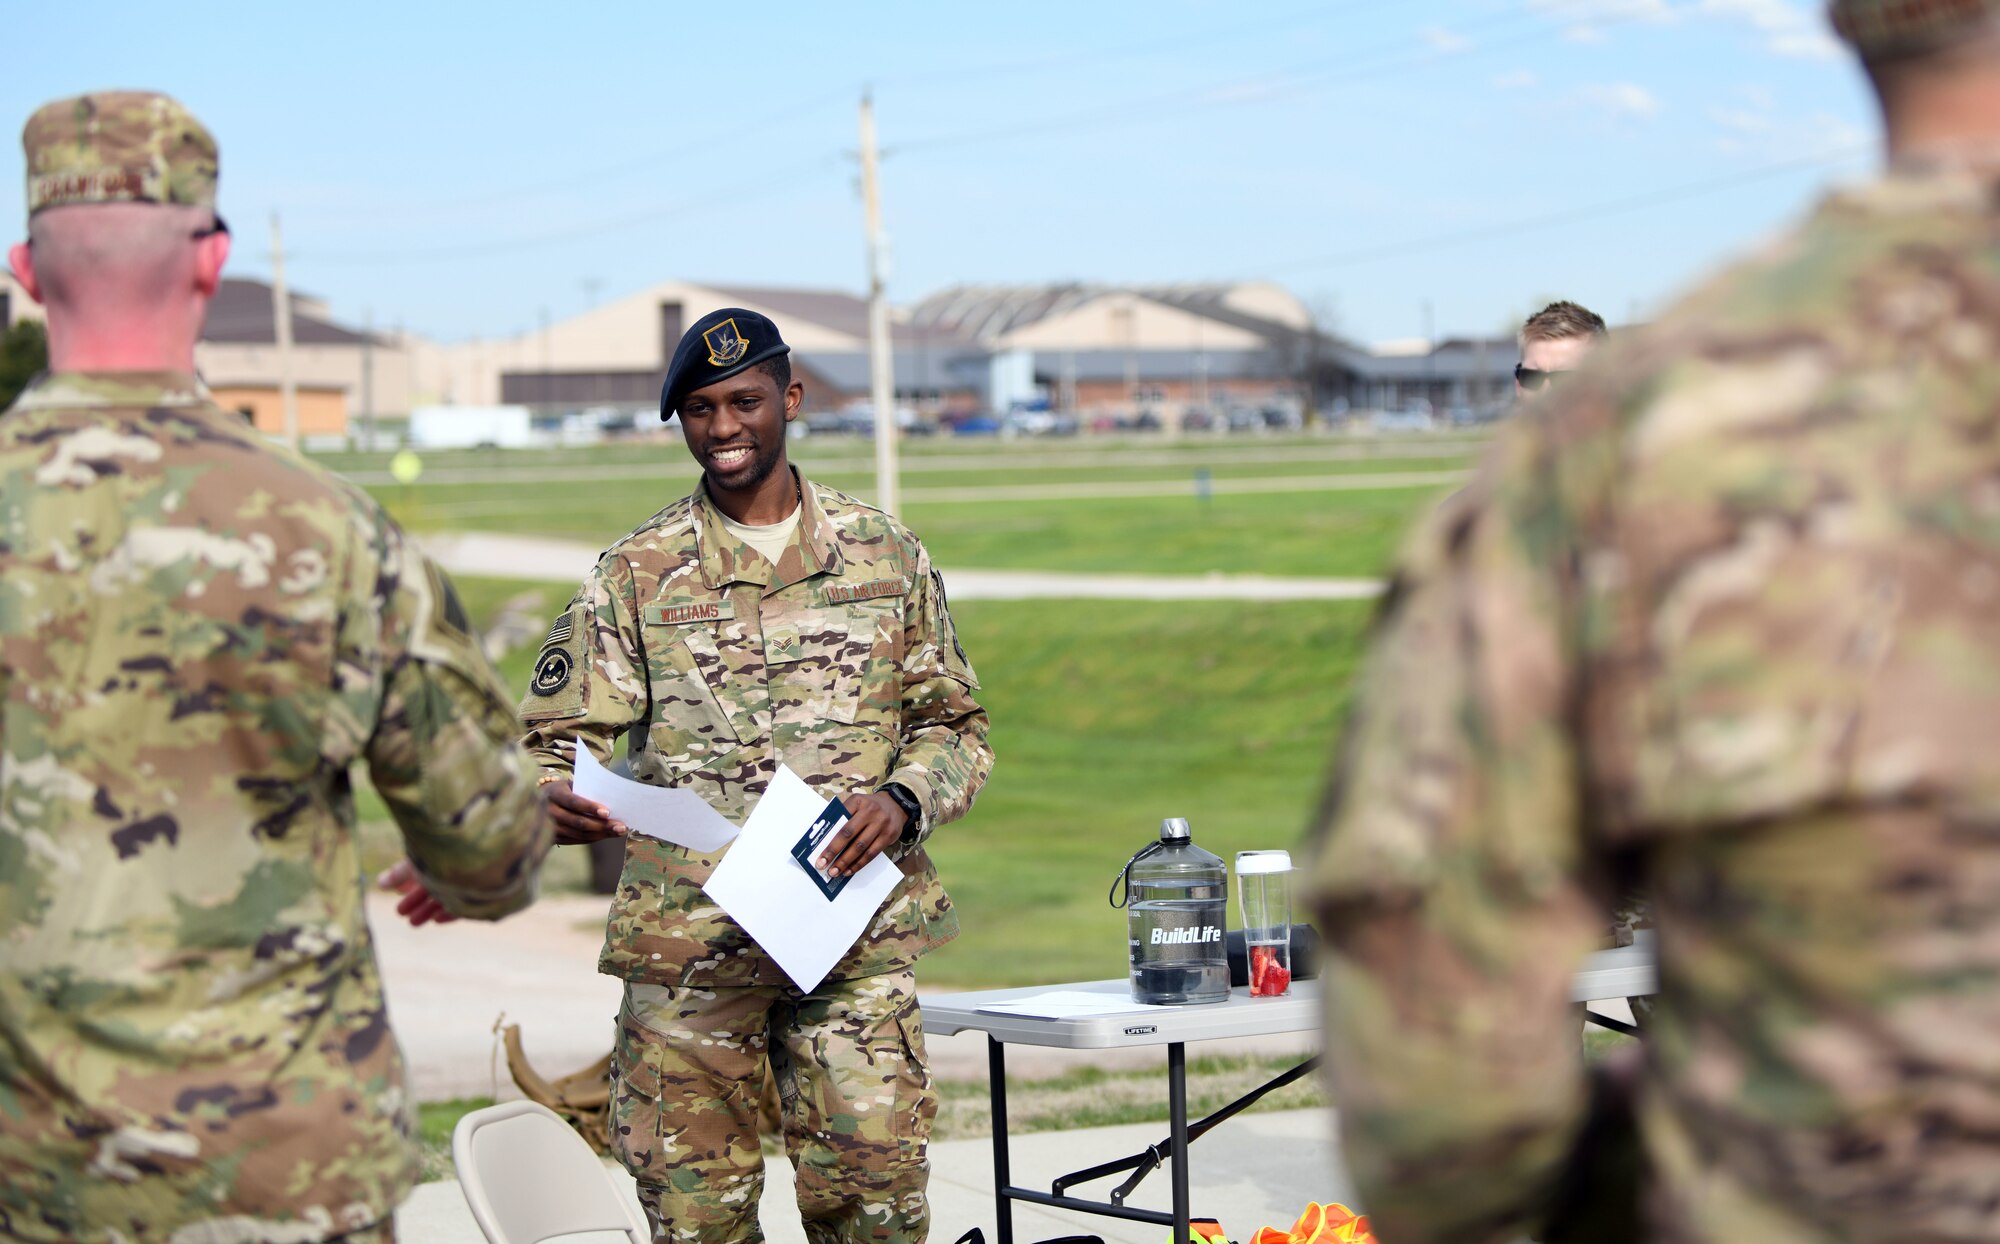 Senior Airman Charles Williams, a 28th Security Forces Squadron response force team member, announces the winners of the Police Week Ruck Challenge at Heritage Lake on Ellsworth Air Force Base, S.D., May 13, 2019.  Participants were required to complete the 4.5 mile ruck, while carrying at least 40 pounds on their backs. The challenge was held in recognition of National Police Week, which pays tribute to law enforcement officers who have died while serving communities nationwide. (U.S. Air Force photo by Airman 1st Class Christina Bennett)